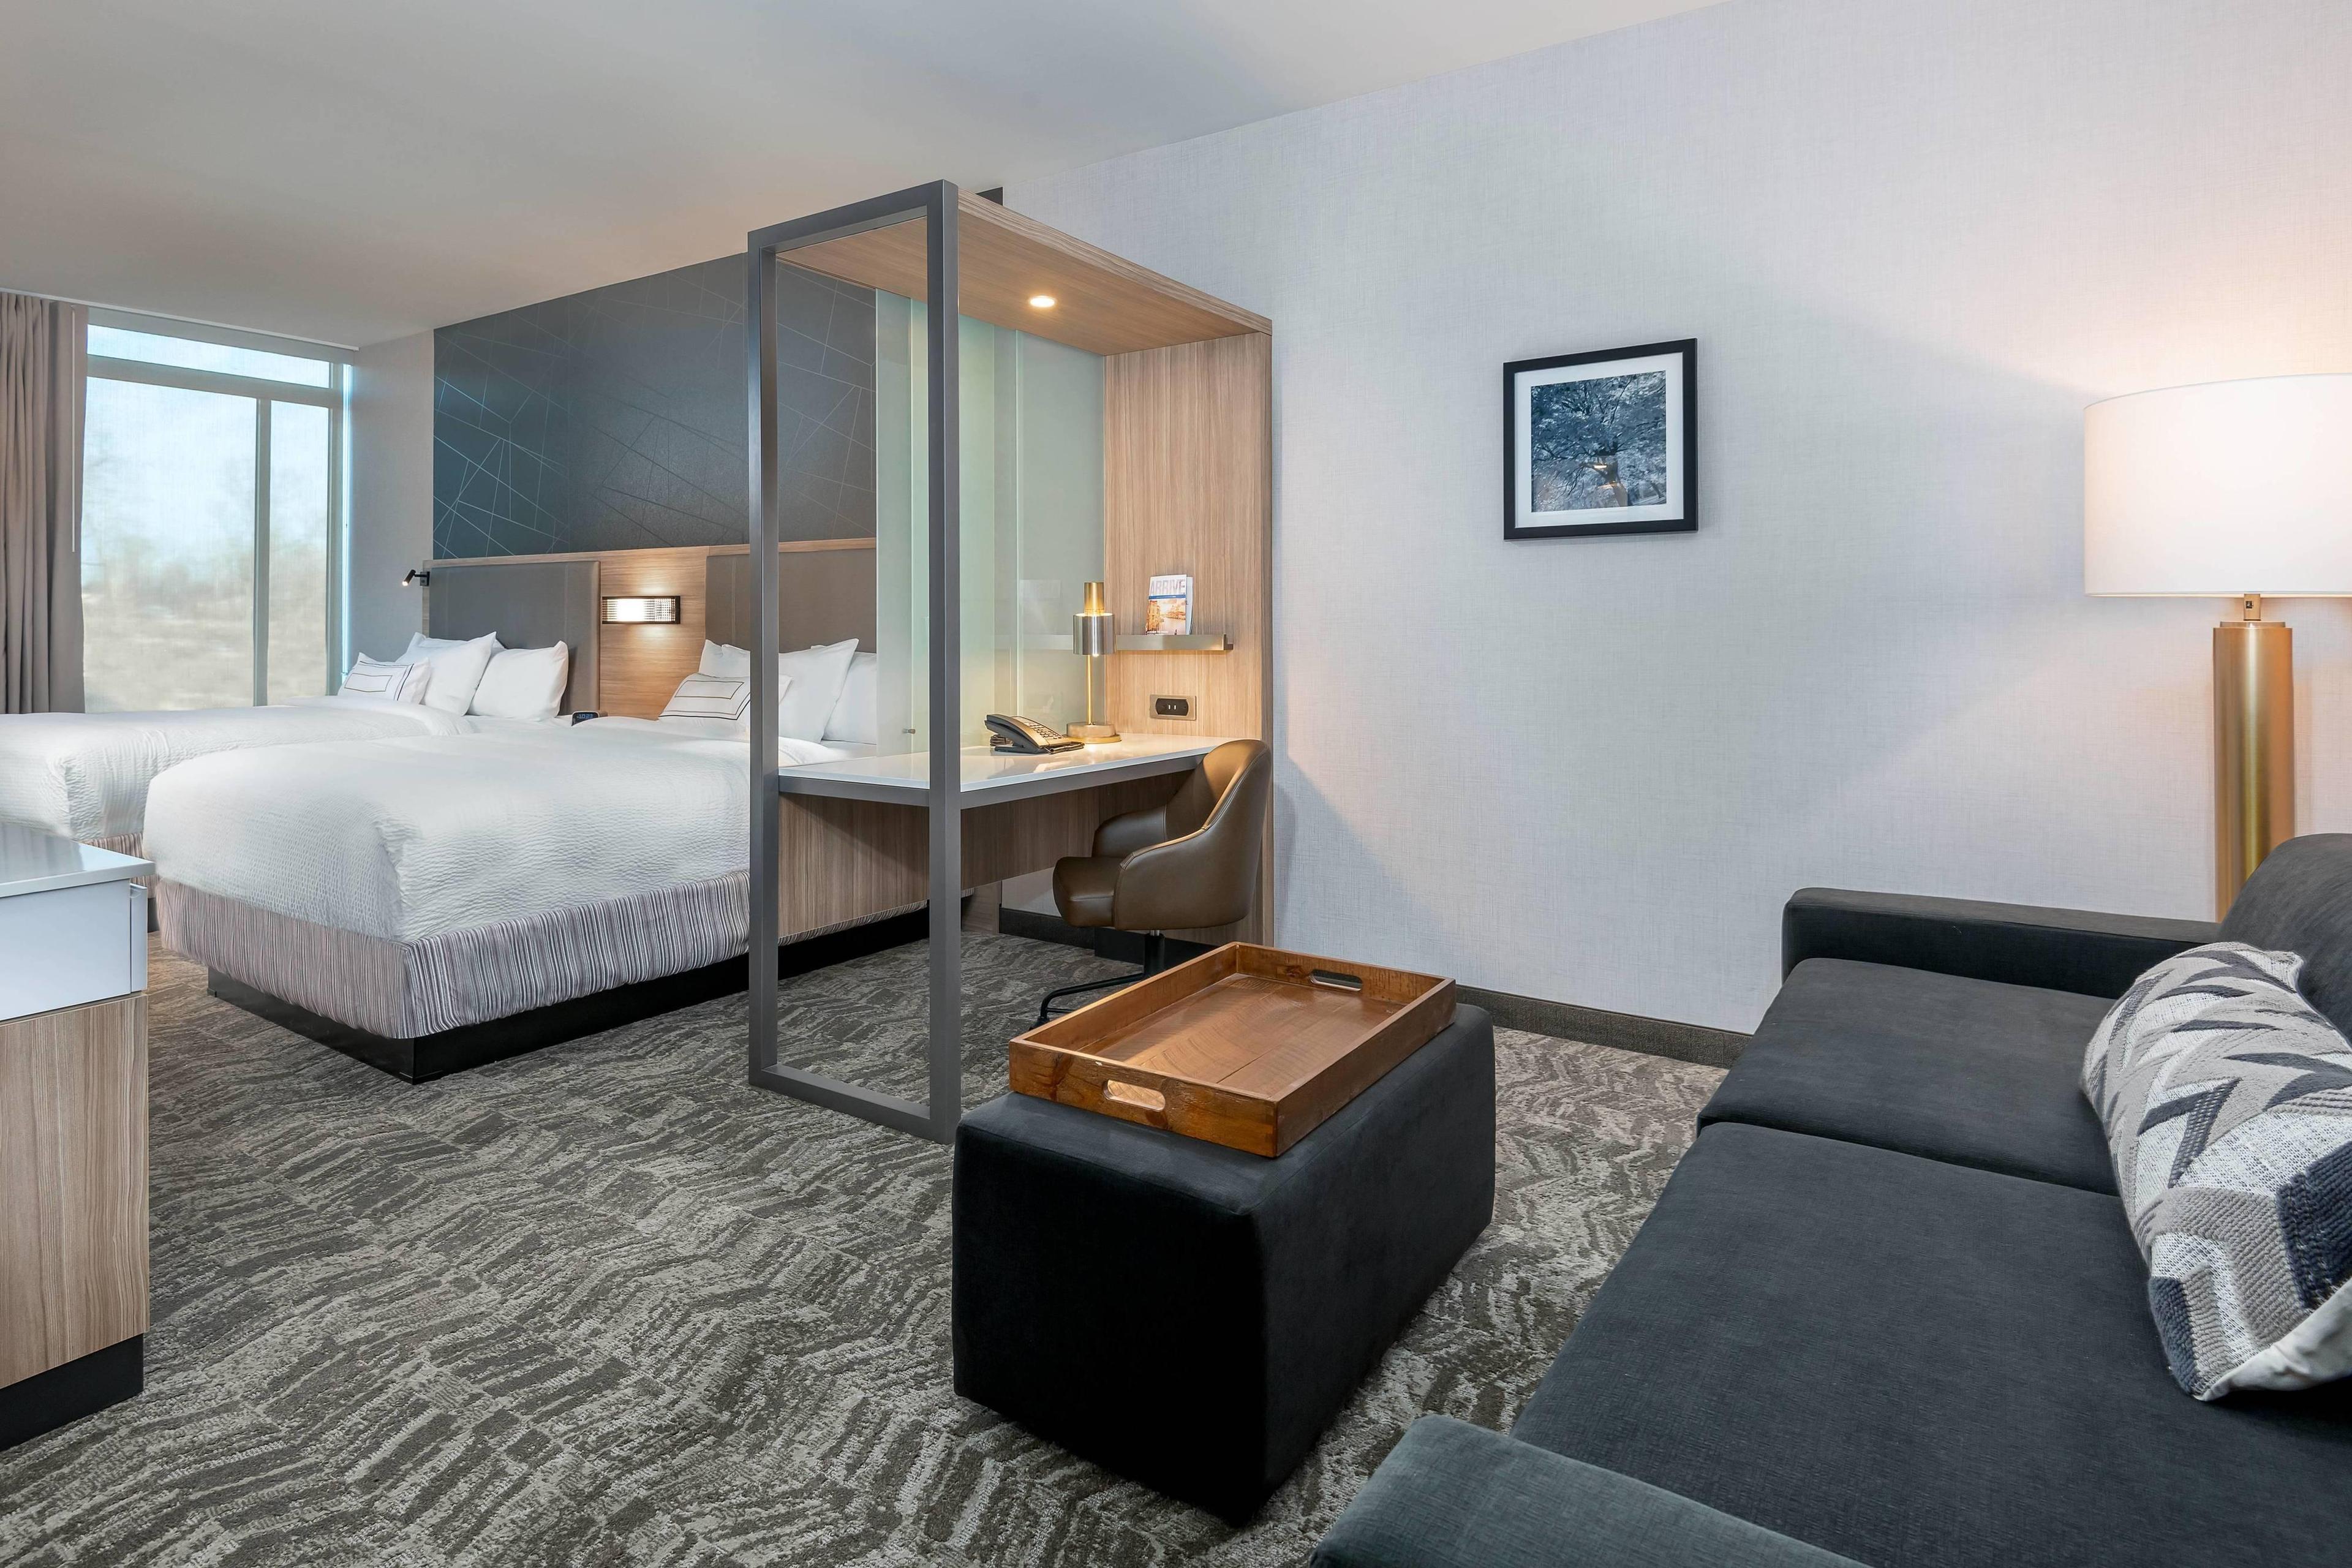 Spacious rooms await you with enough room for multiple people.